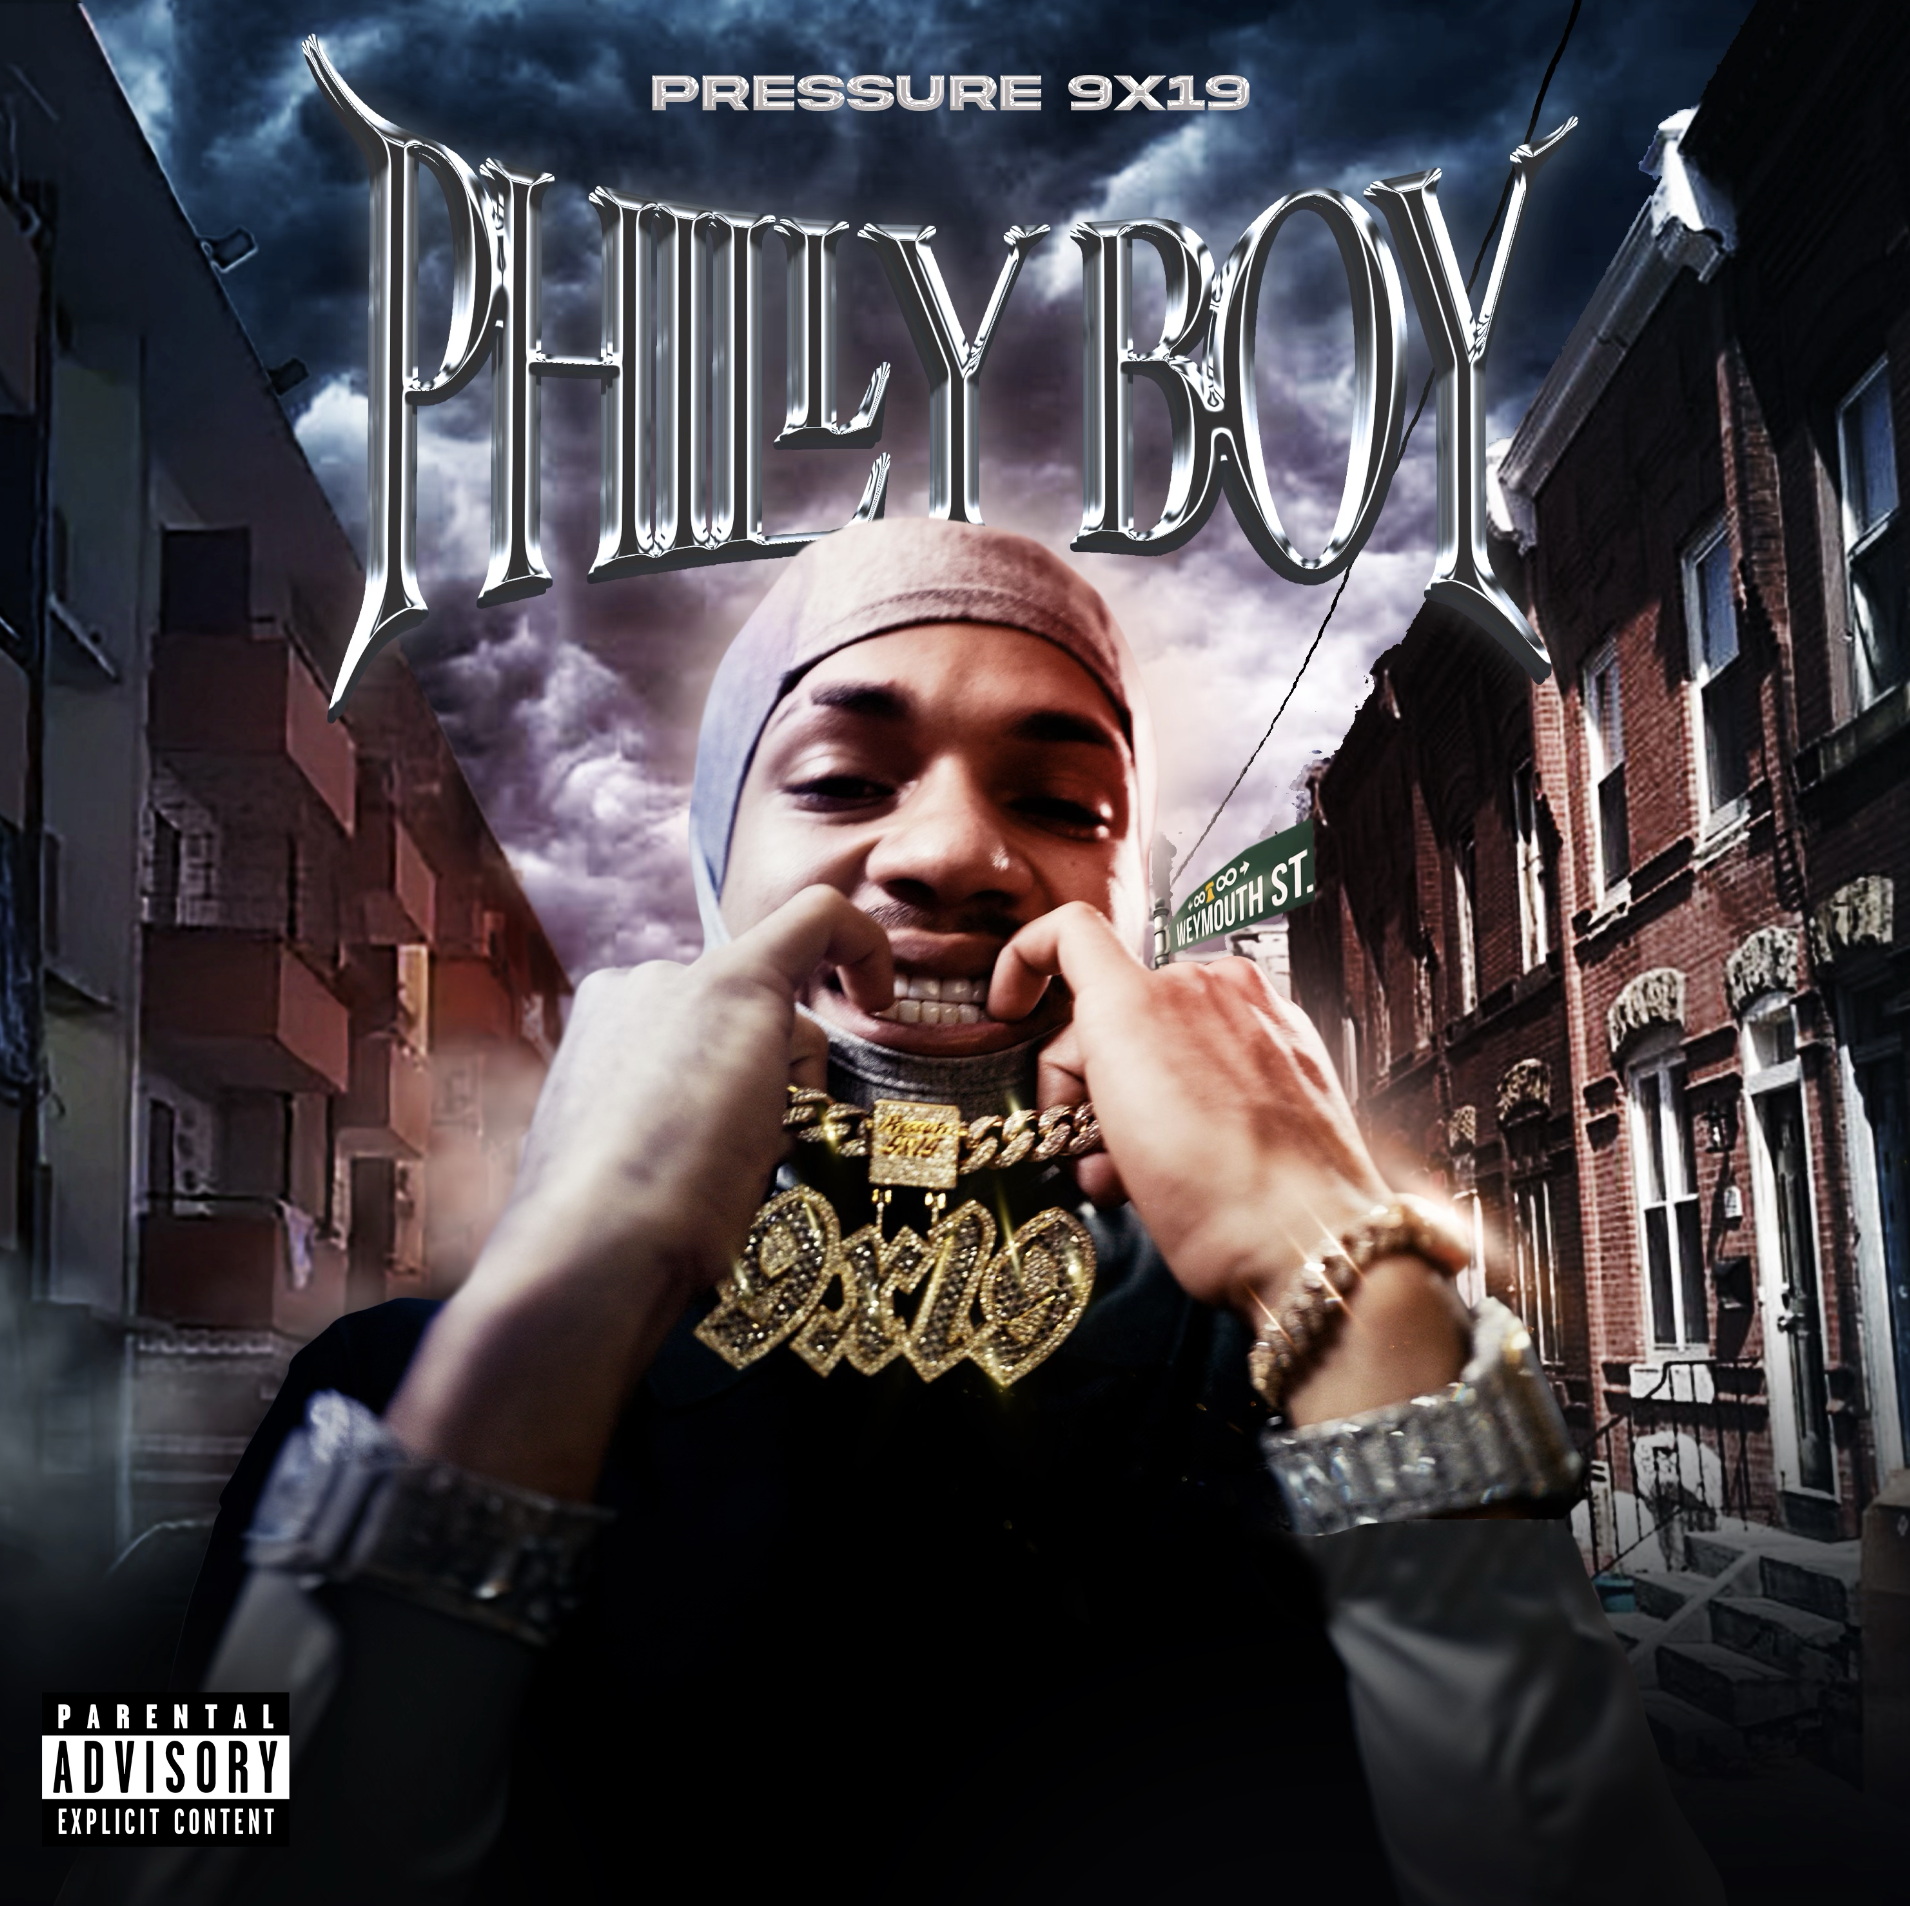 Puerto Rican Riser Pressure 9X19 Drops Off “Philly Boy” Single and Video